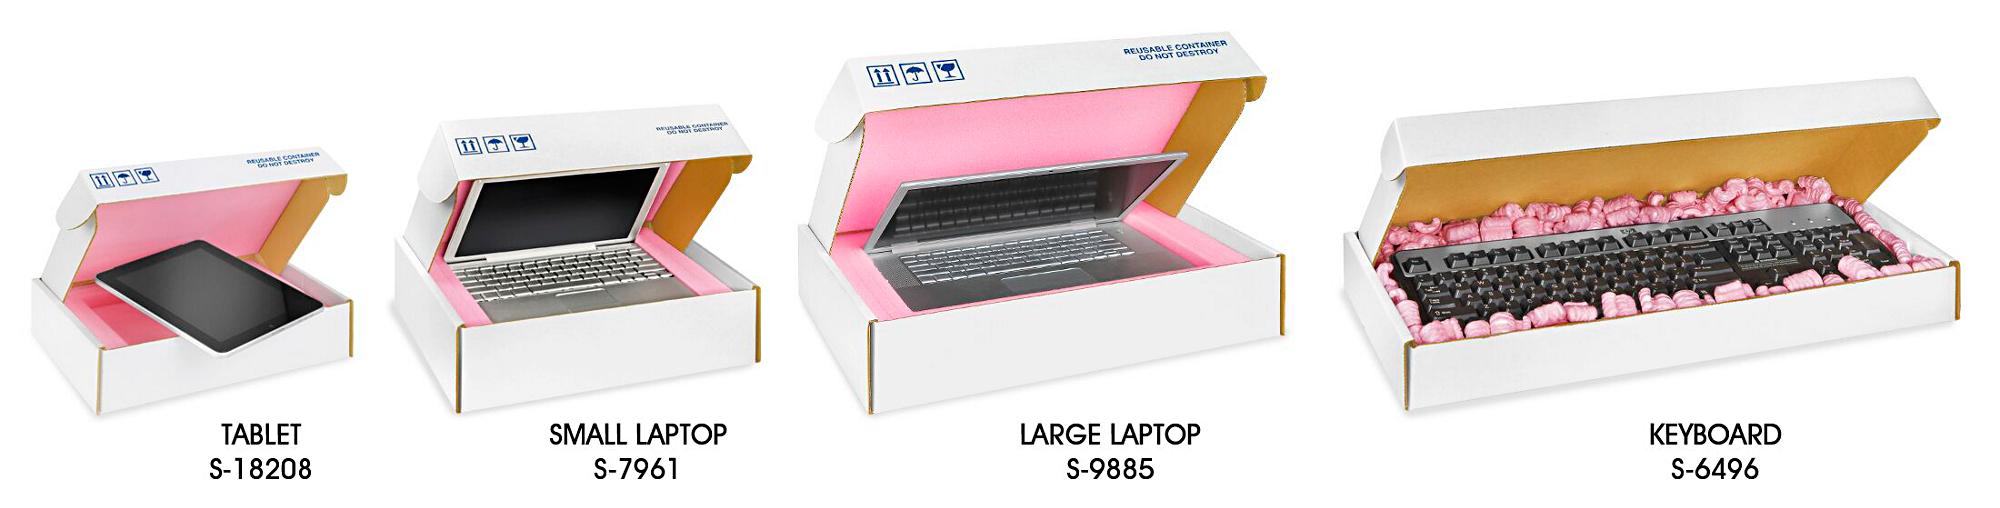 Laptop and Keyboard Mailers